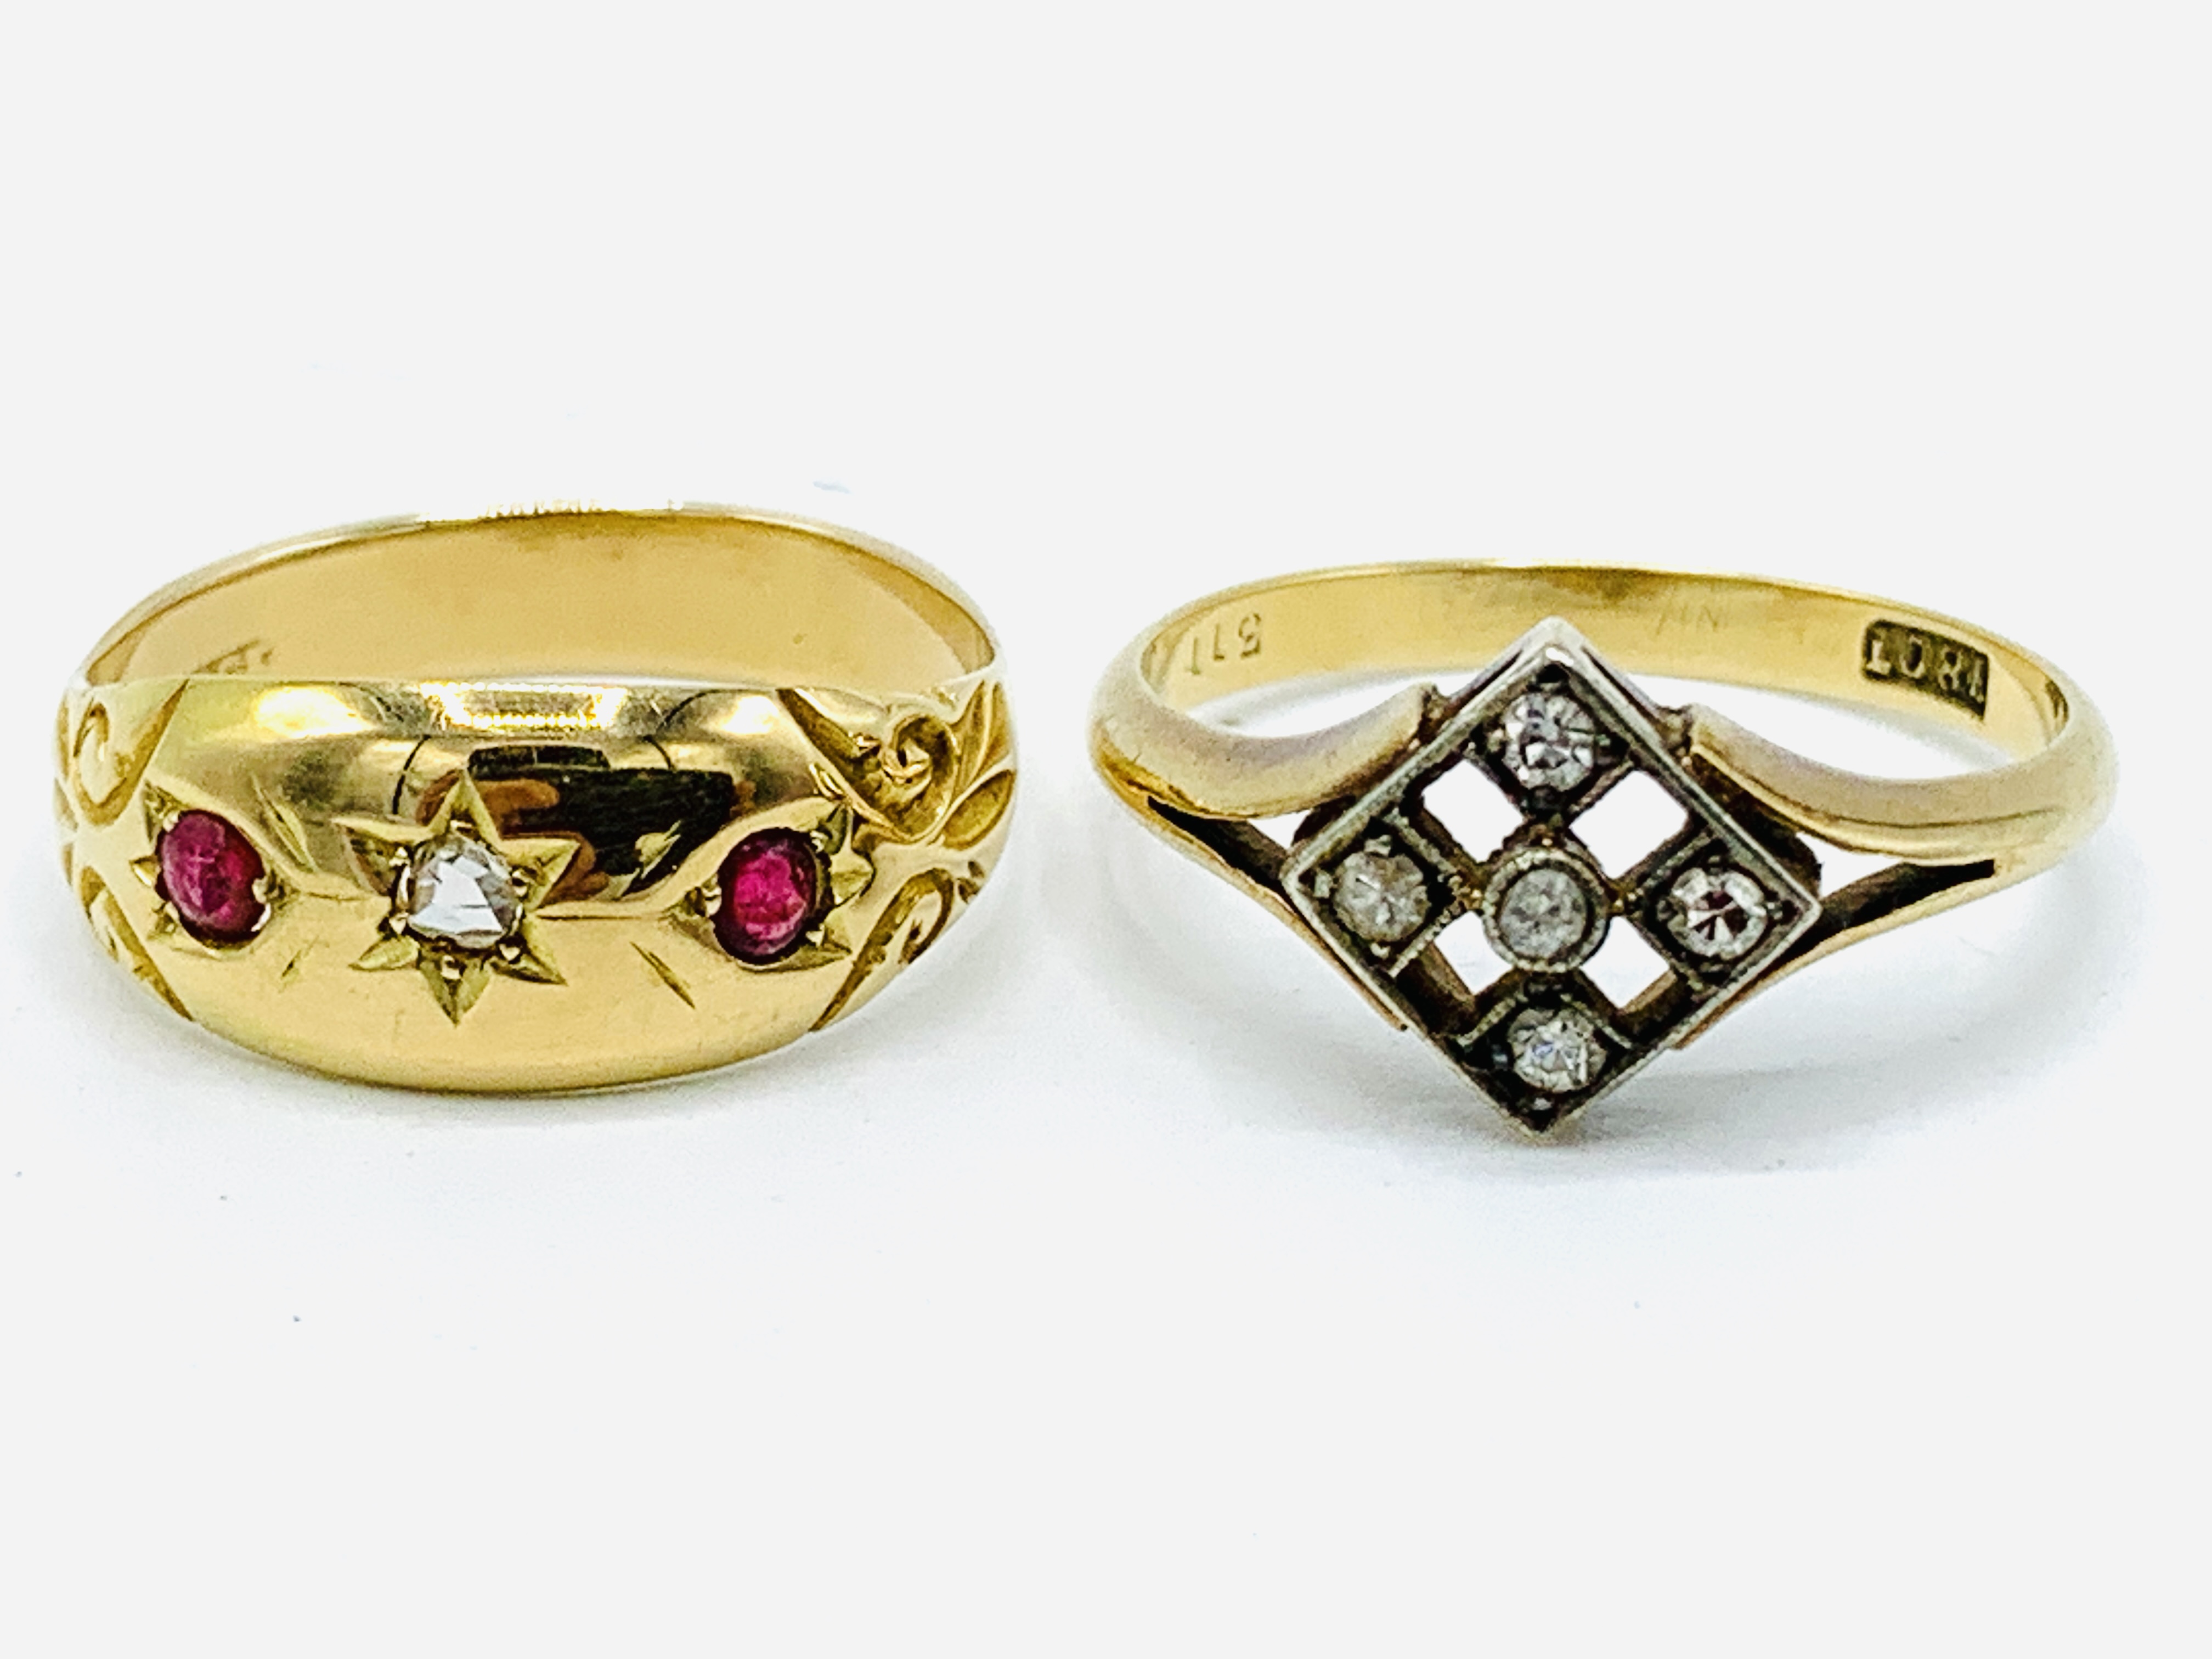 18ct gold ring set with 4 diamonds in a square, and an 18ct diamond and ruby set 'gypsy' ring